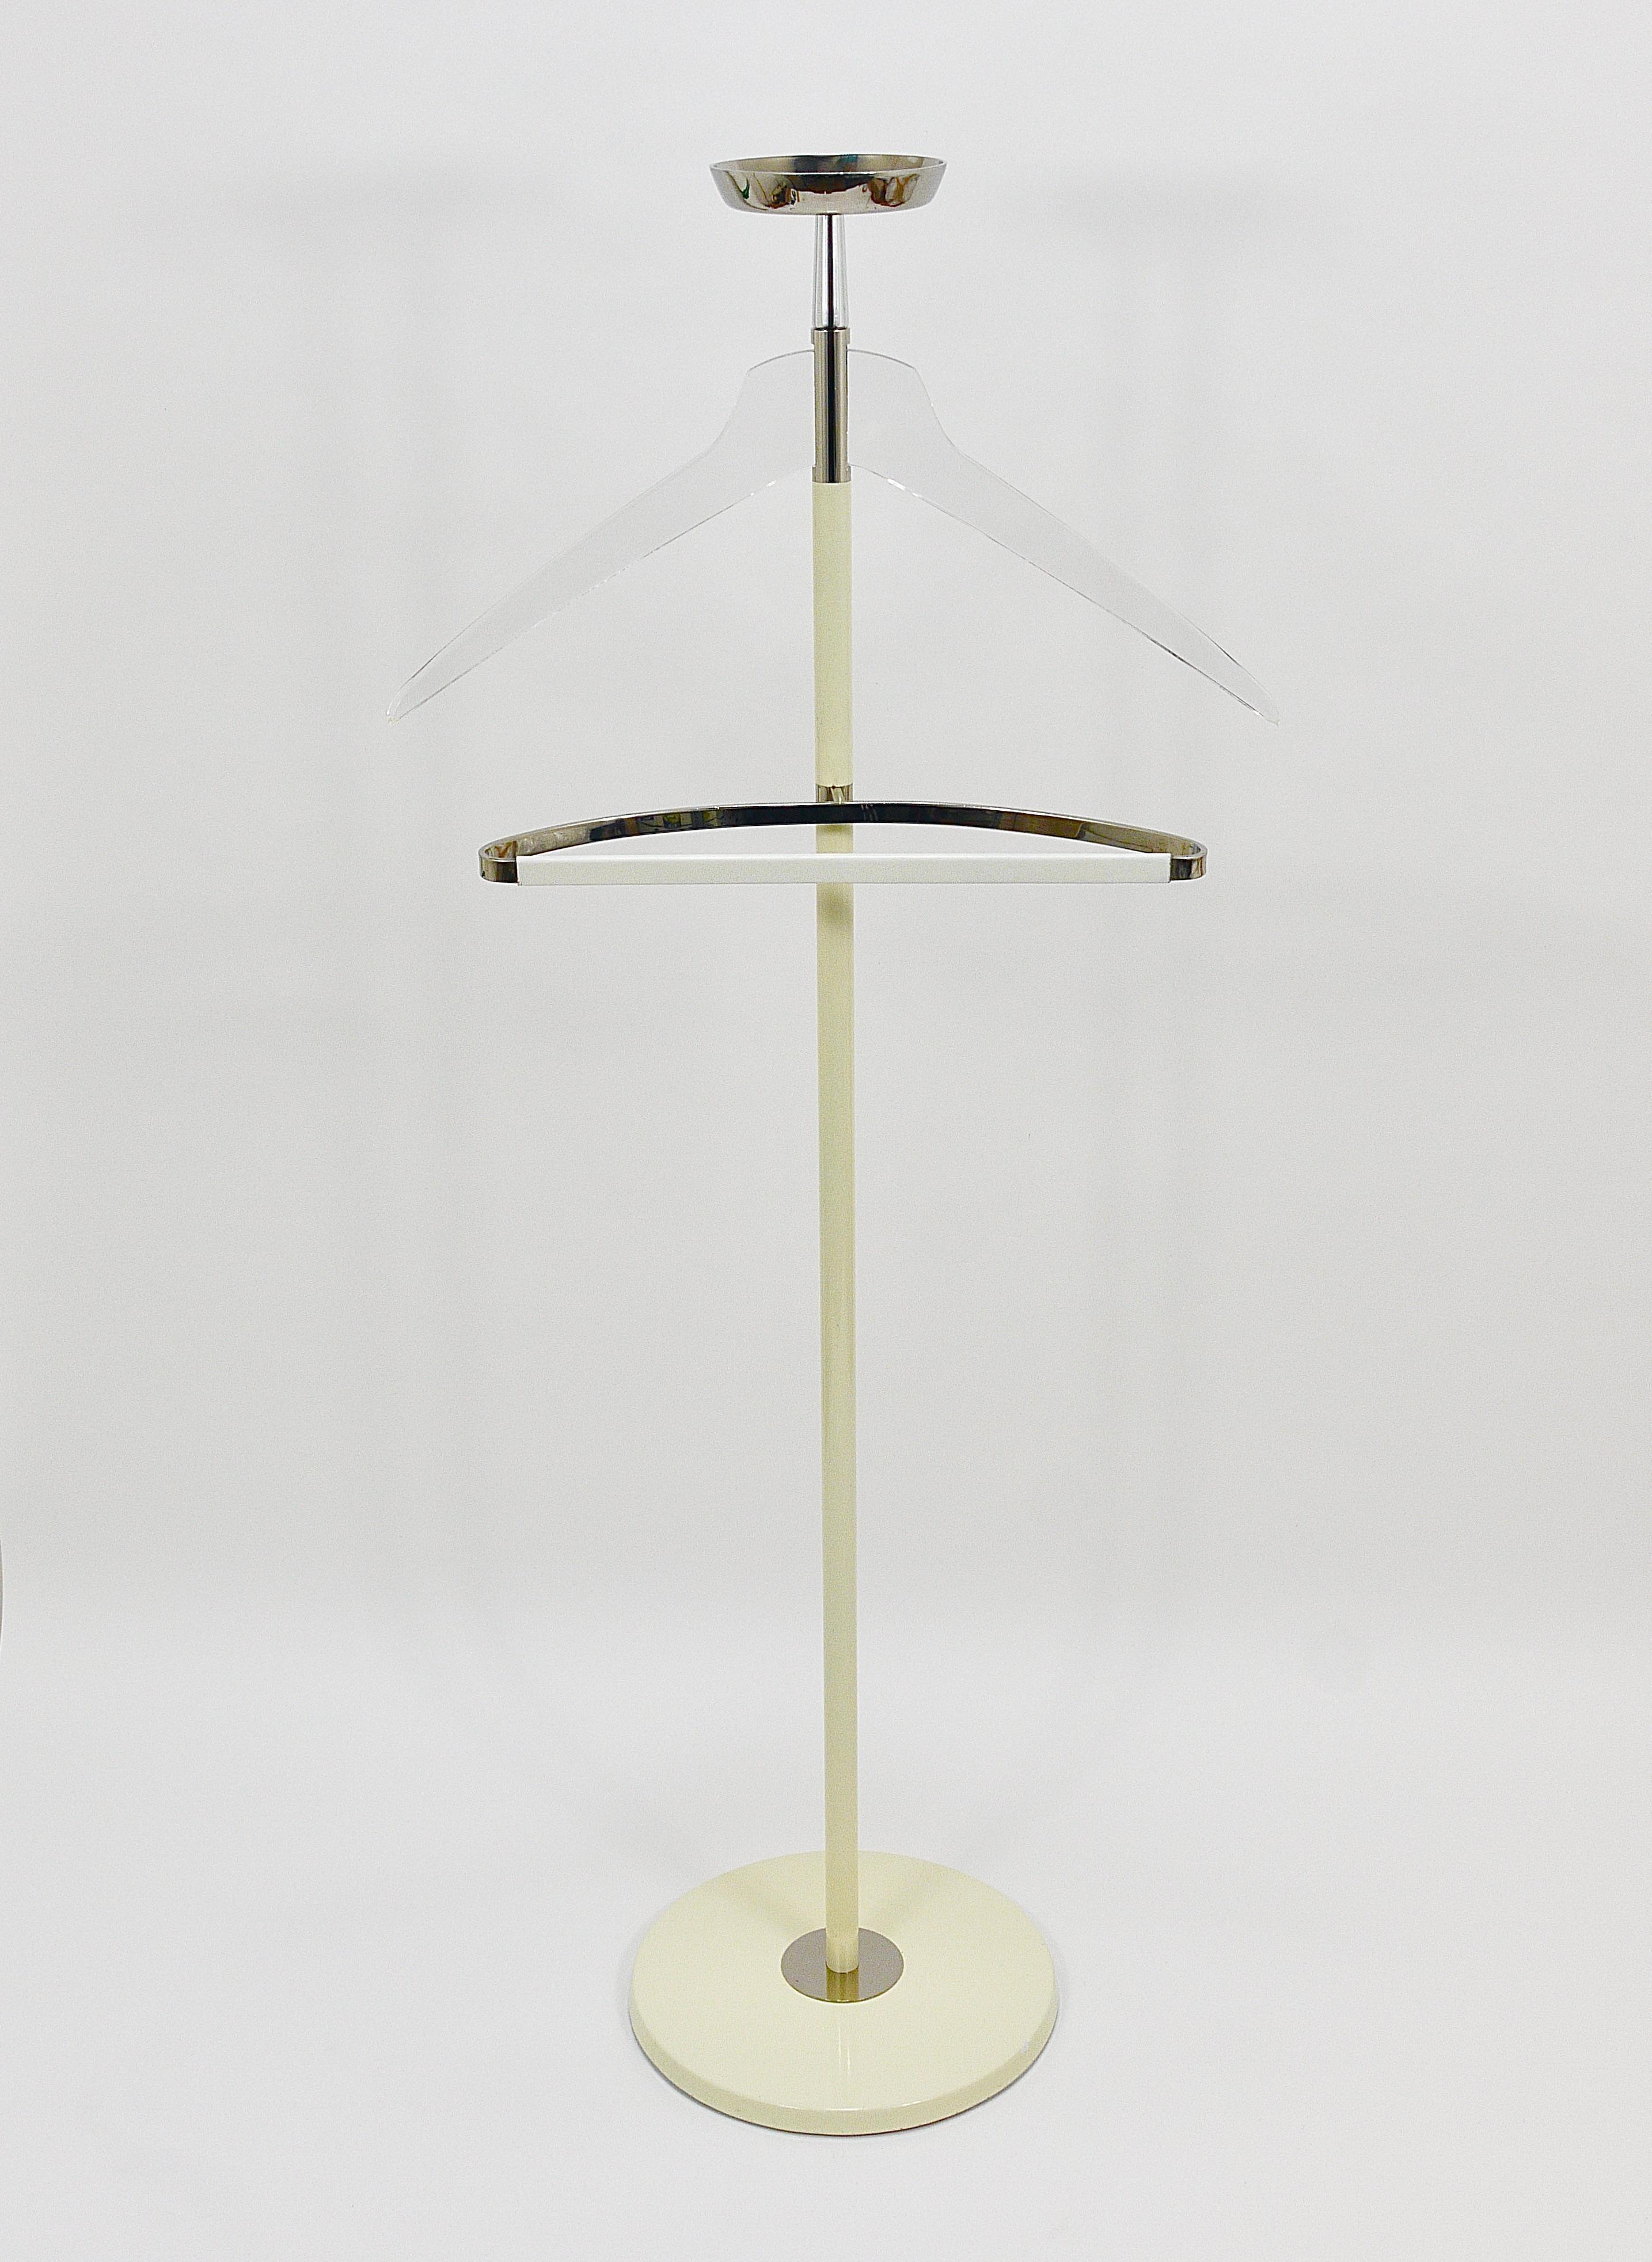 This 1970s sculptural modernist Lady’s and Gentleman’s valet clothing stand exudes elegance in the Hollywood Regency style. Crafted by Vereinigte Werkstätten München in Munich, Germany, this high-quality piece boasts a metal construction with a